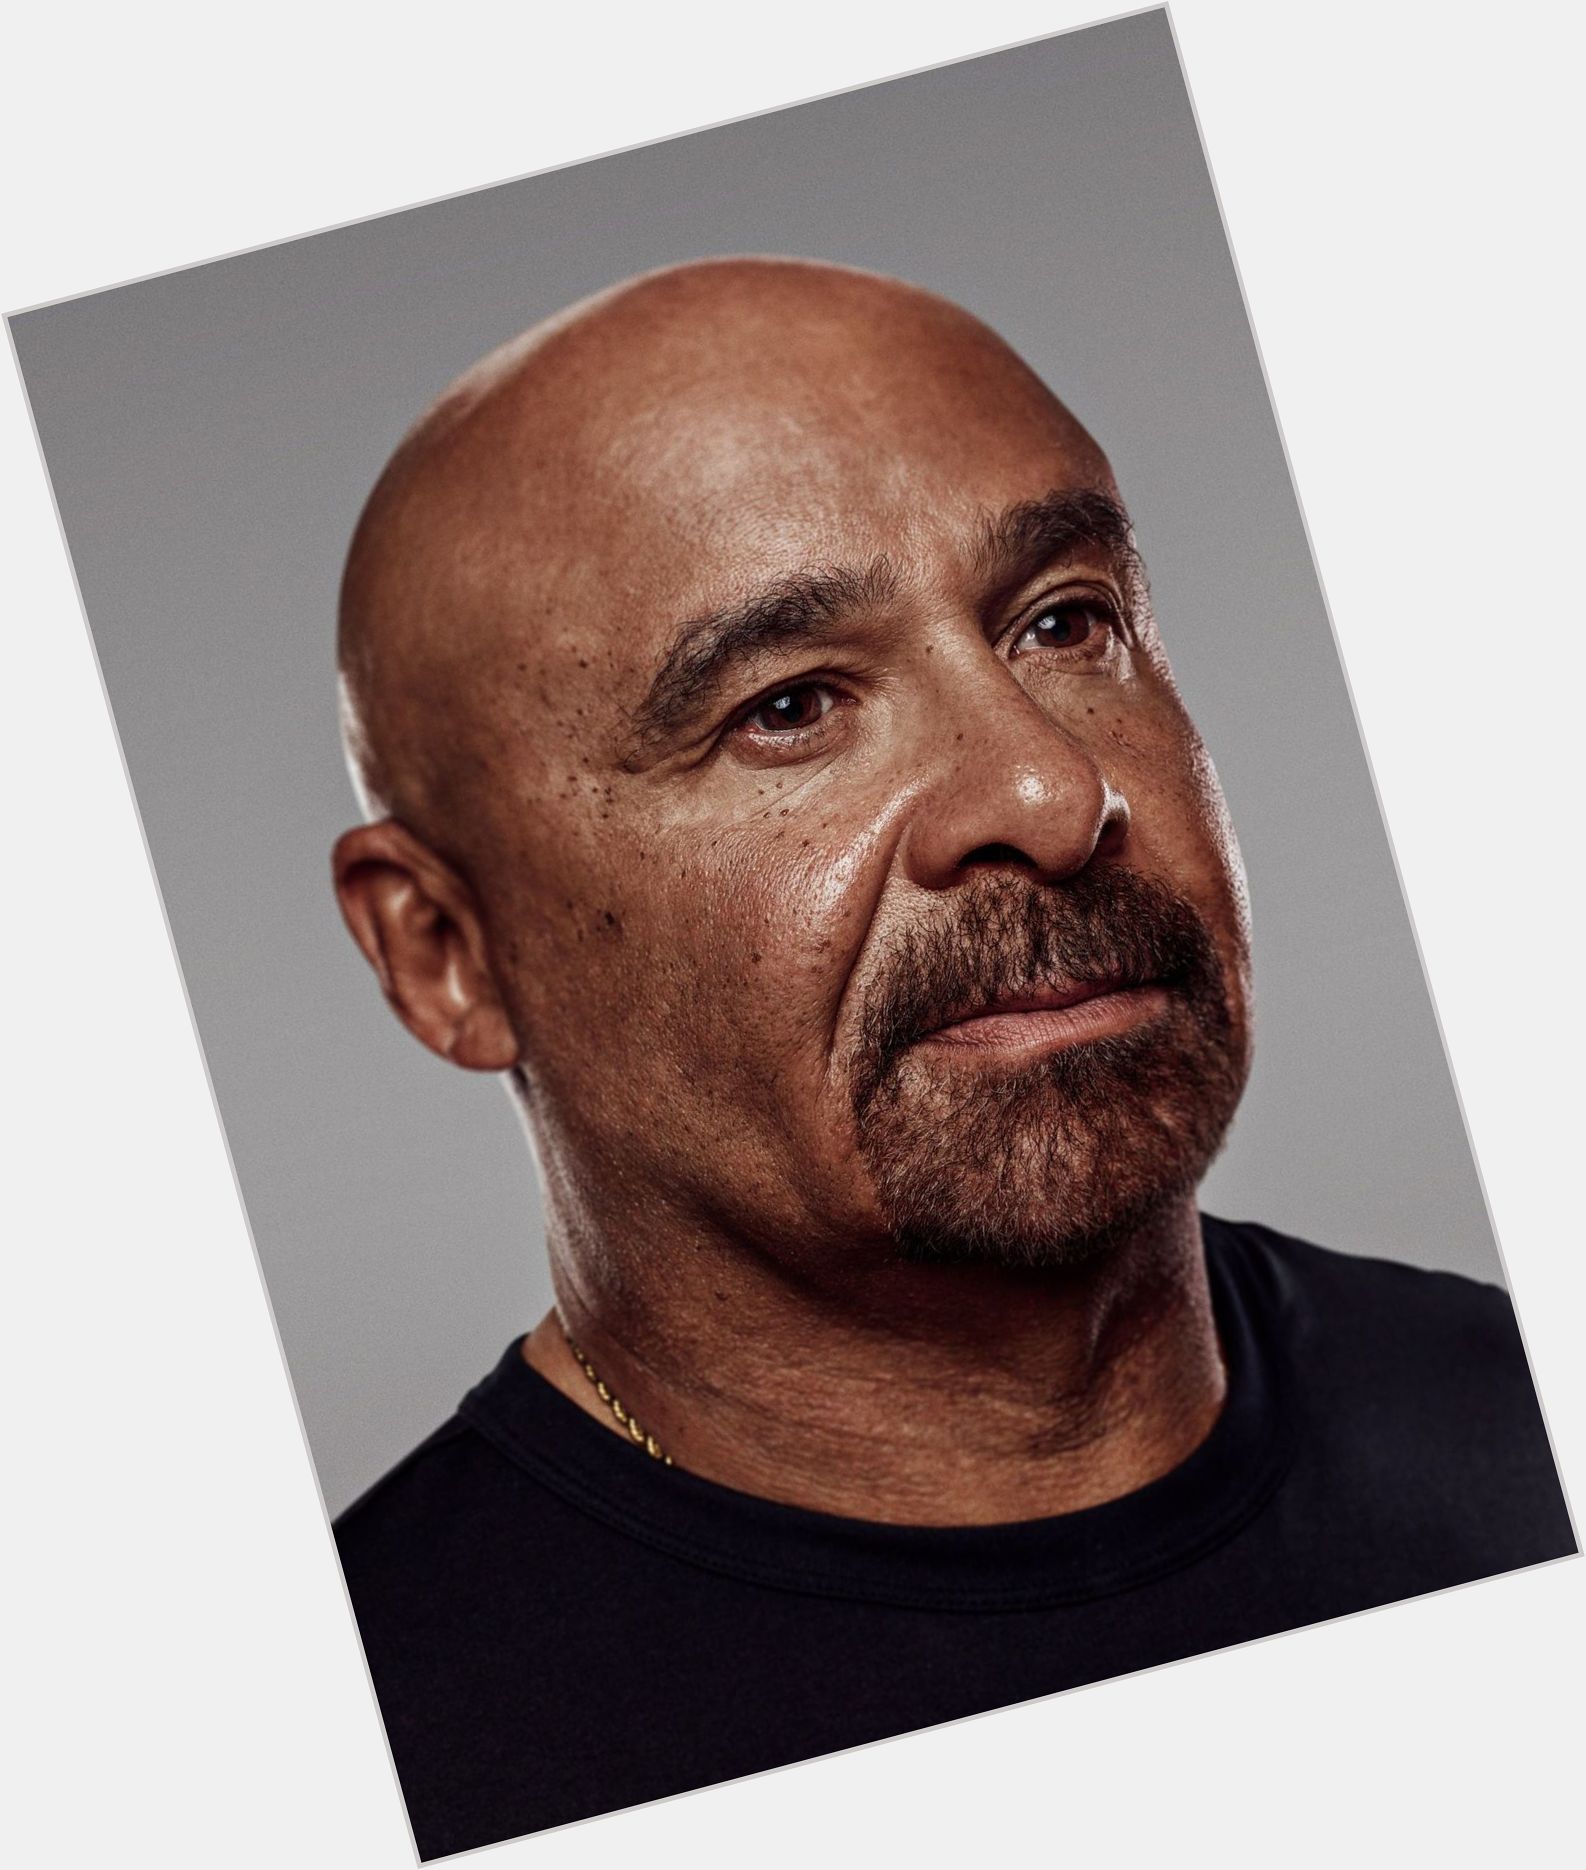 <a href="/hot-men/grant-fuhr/is-he-black-married-alive-still-native-where">Grant Fuhr</a> Athletic body,  